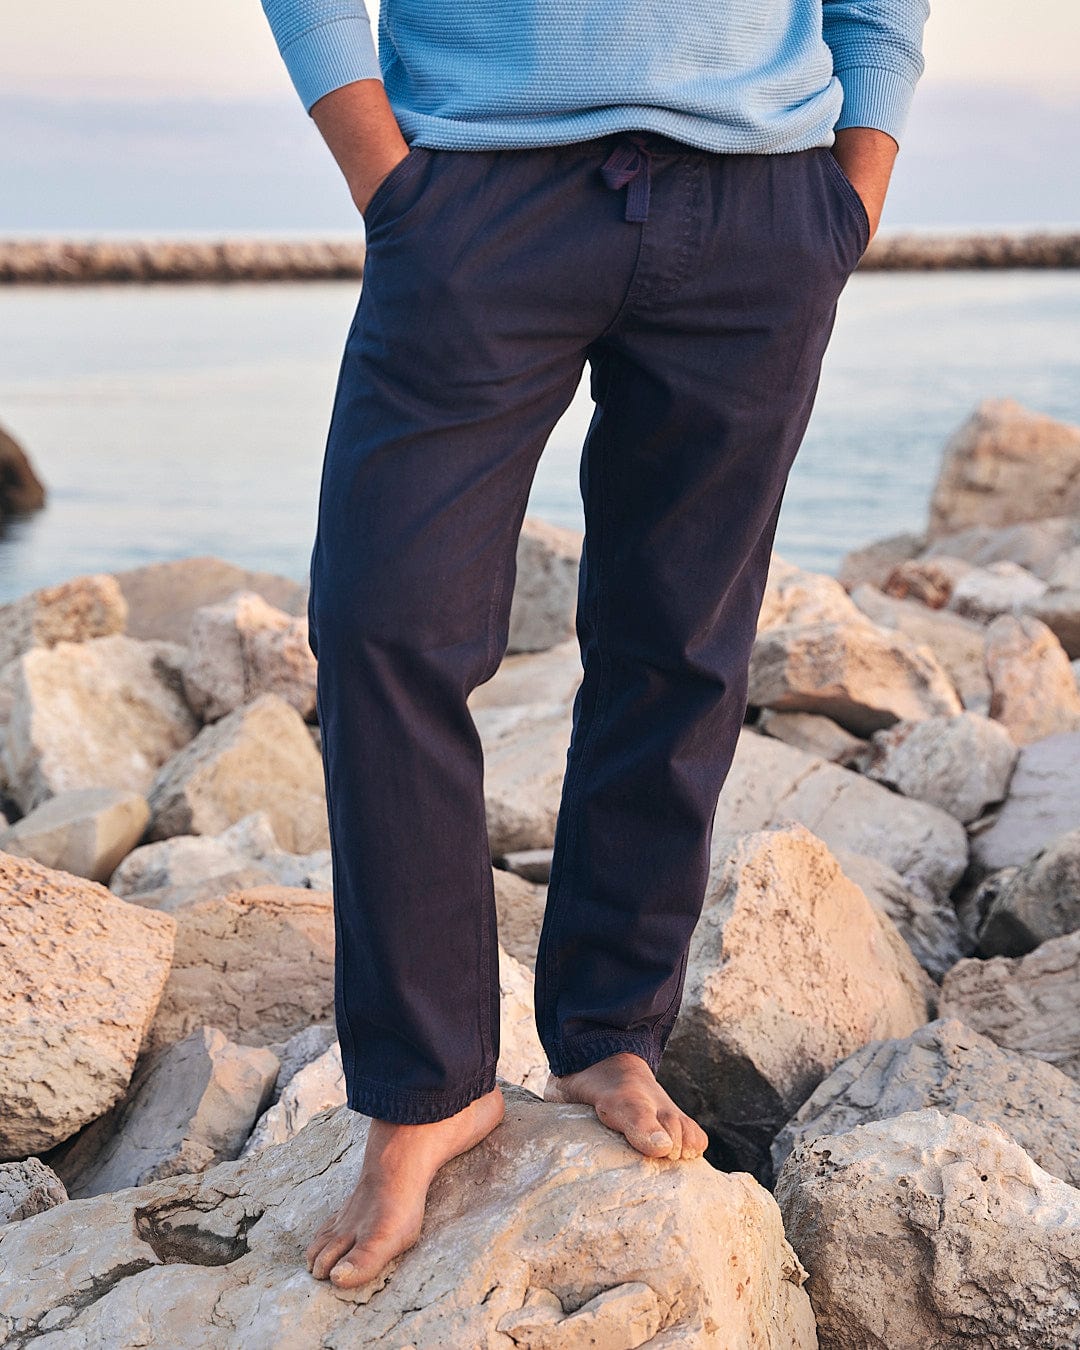 A man enjoying an outdoor adventure, standing on rocks next to the ocean, confidently donning a Meddon - Mens Twill Trouser - Navy by Saltrock.